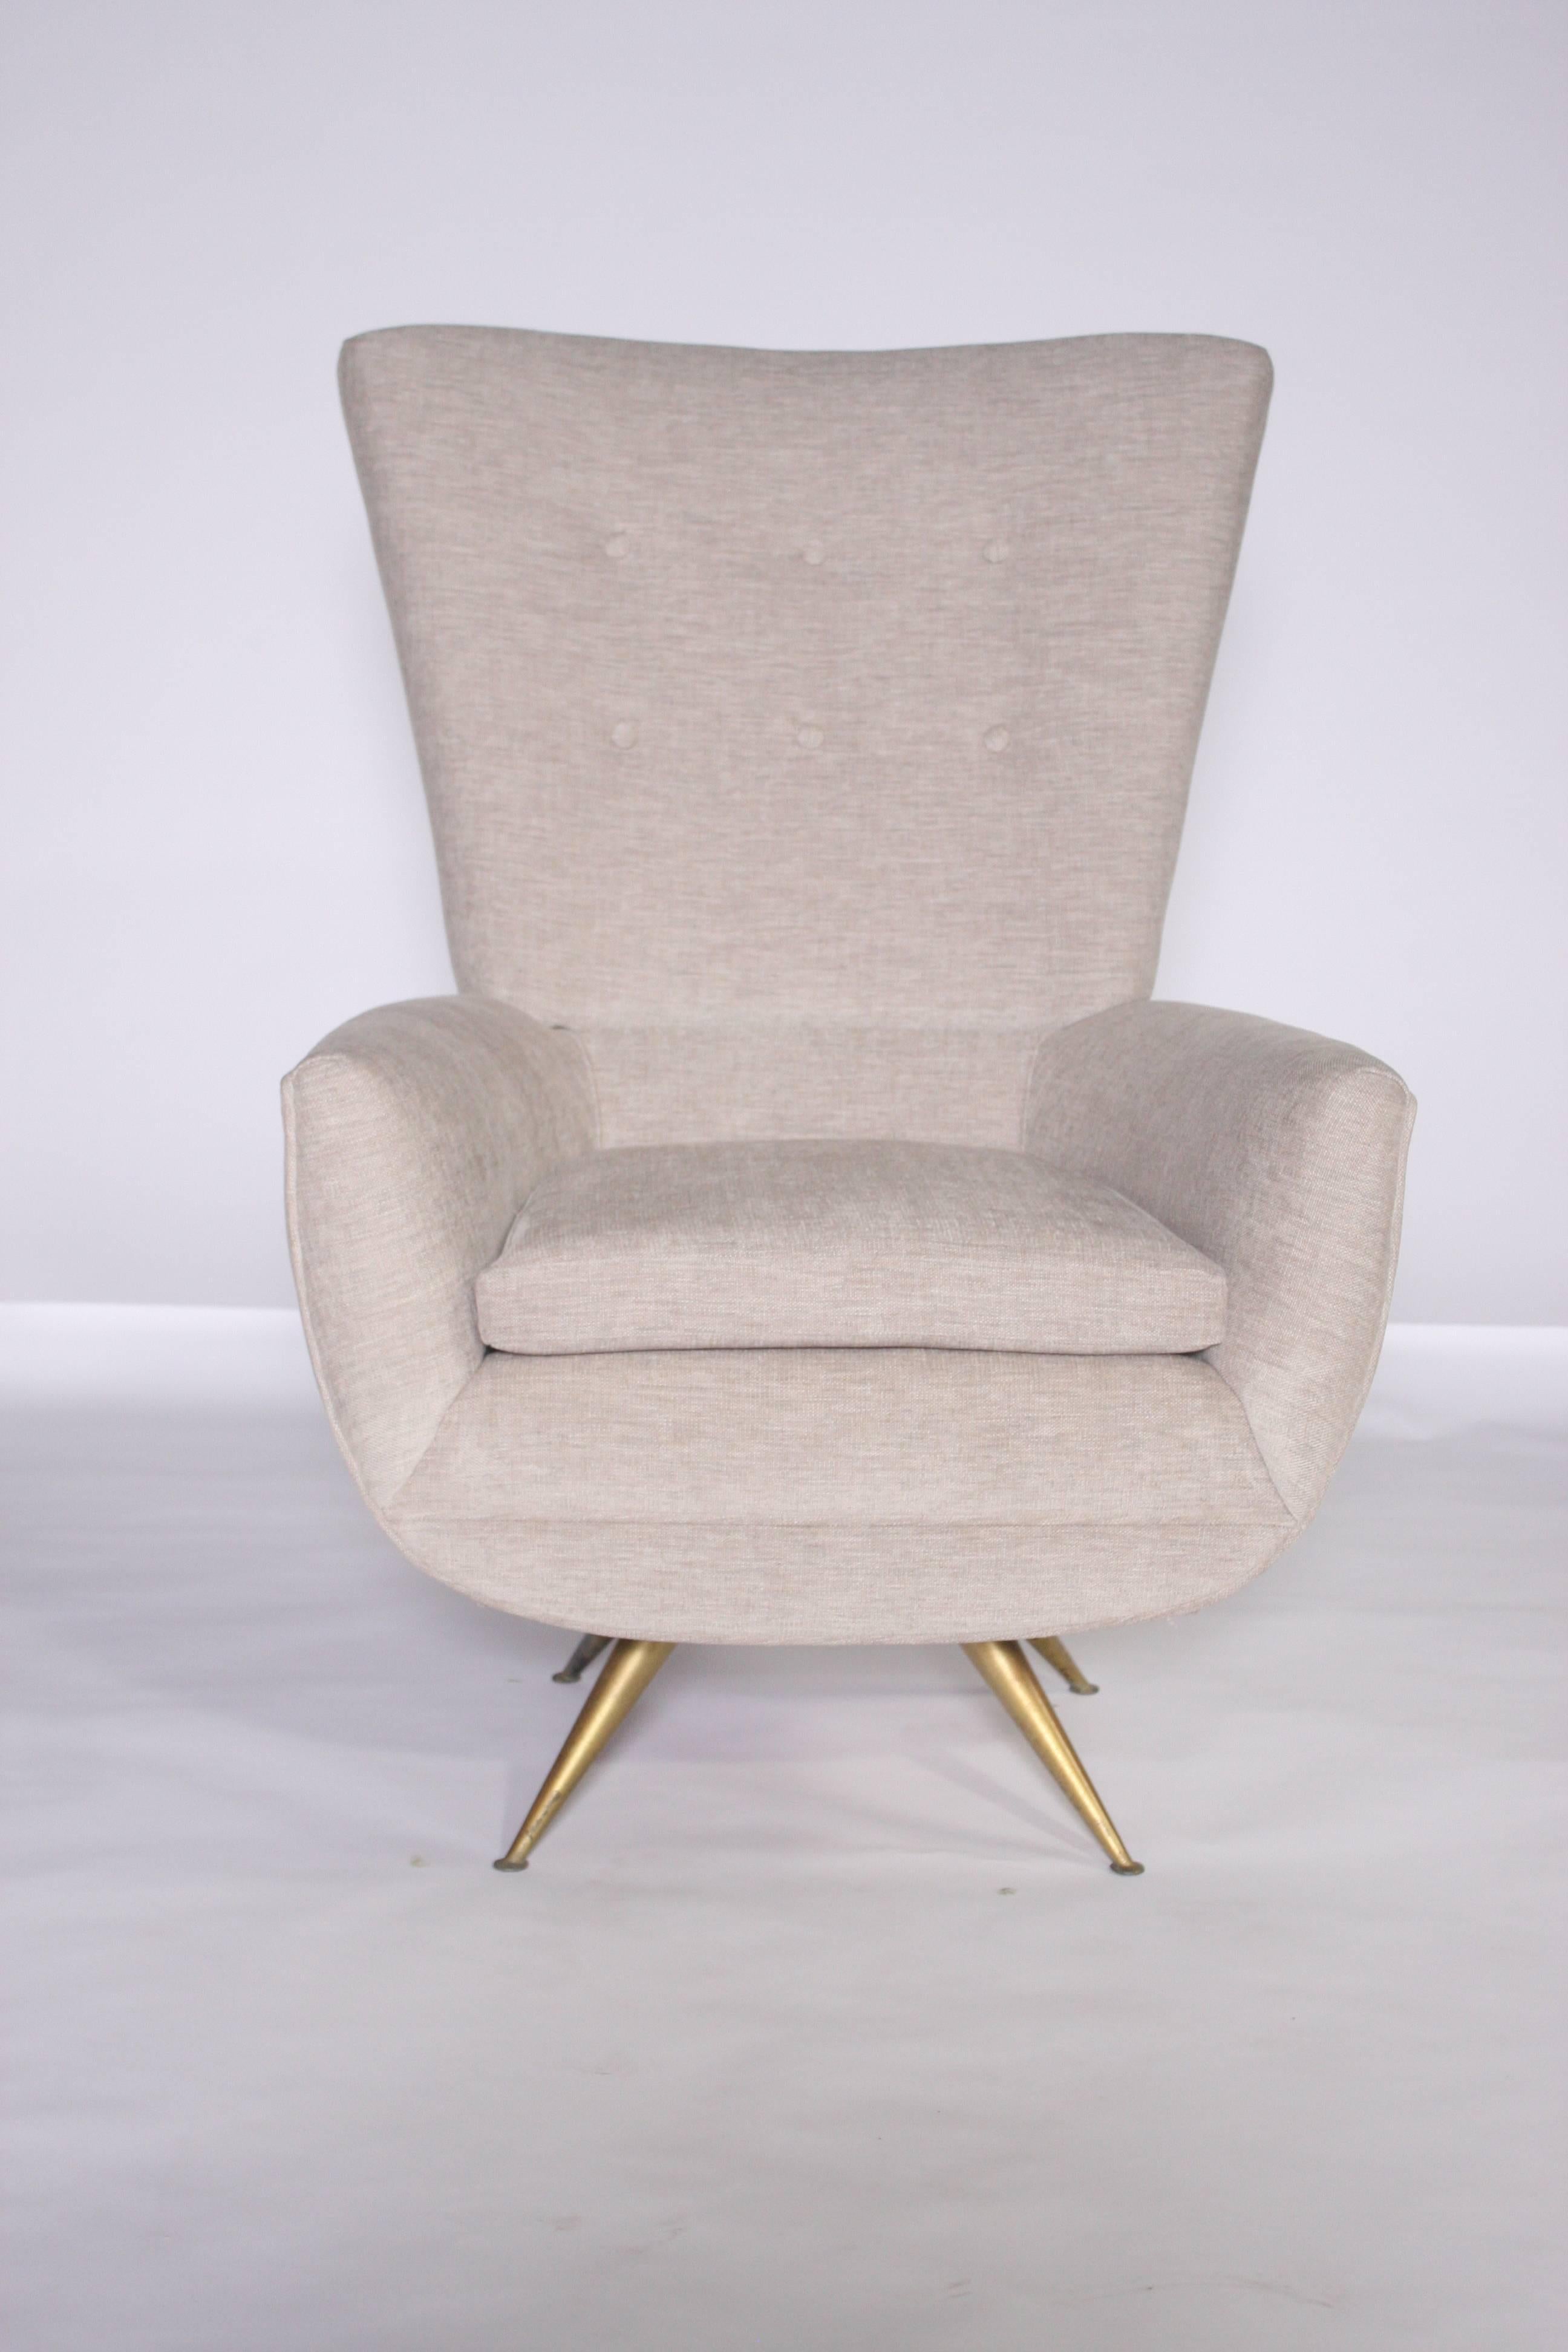 Rare freshly upholstered Mid-Century Modern swivel lounge chair by Chicago architect Henry Glass (1911-2003) with brushed gold metal tapered legs and tall tufted back cushion. Upholstered in a subtle heather gray textured fabric with a removable